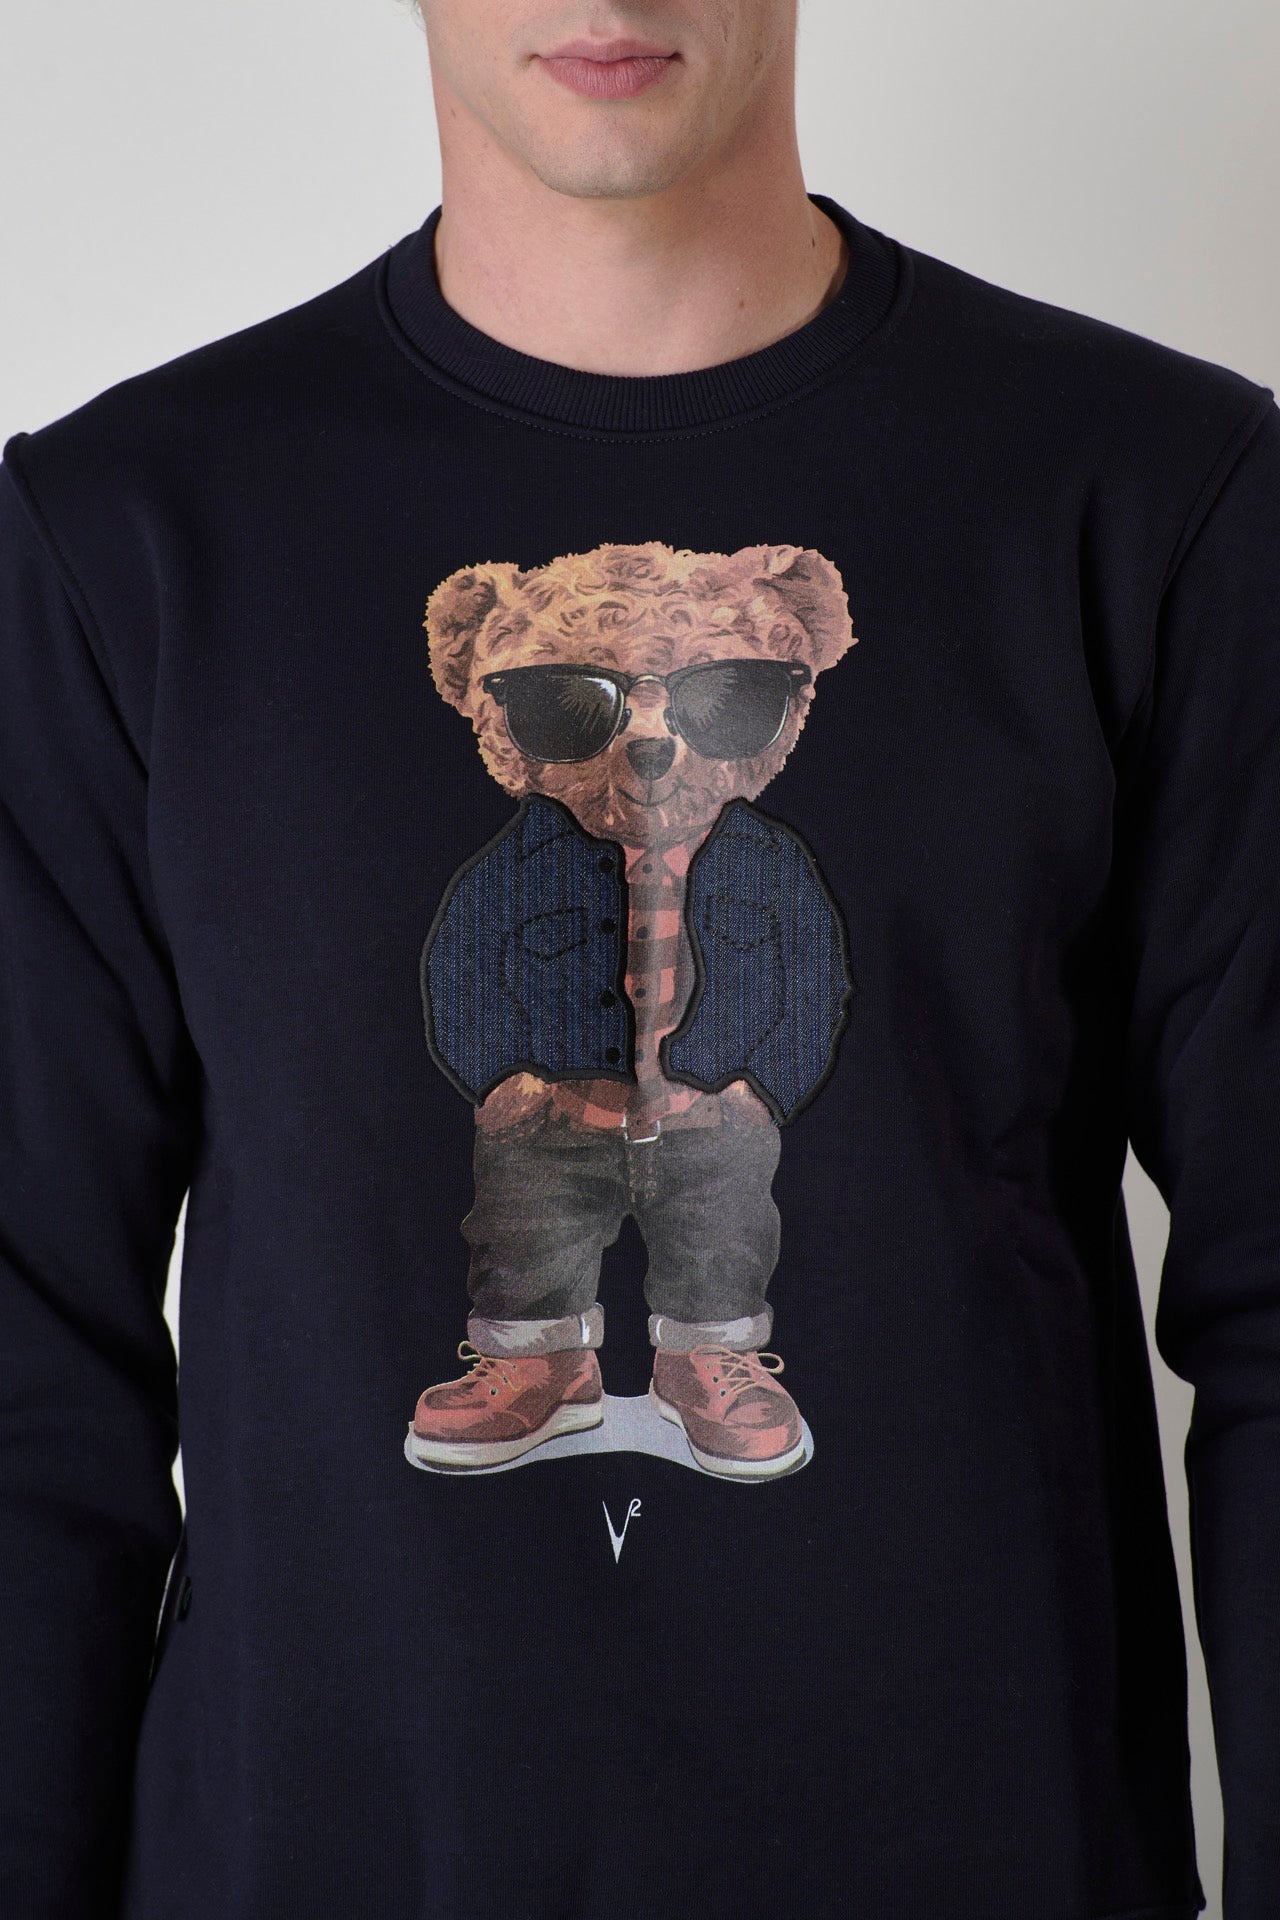 Blue sweatshirt with Teddy print and jeans fabric insert